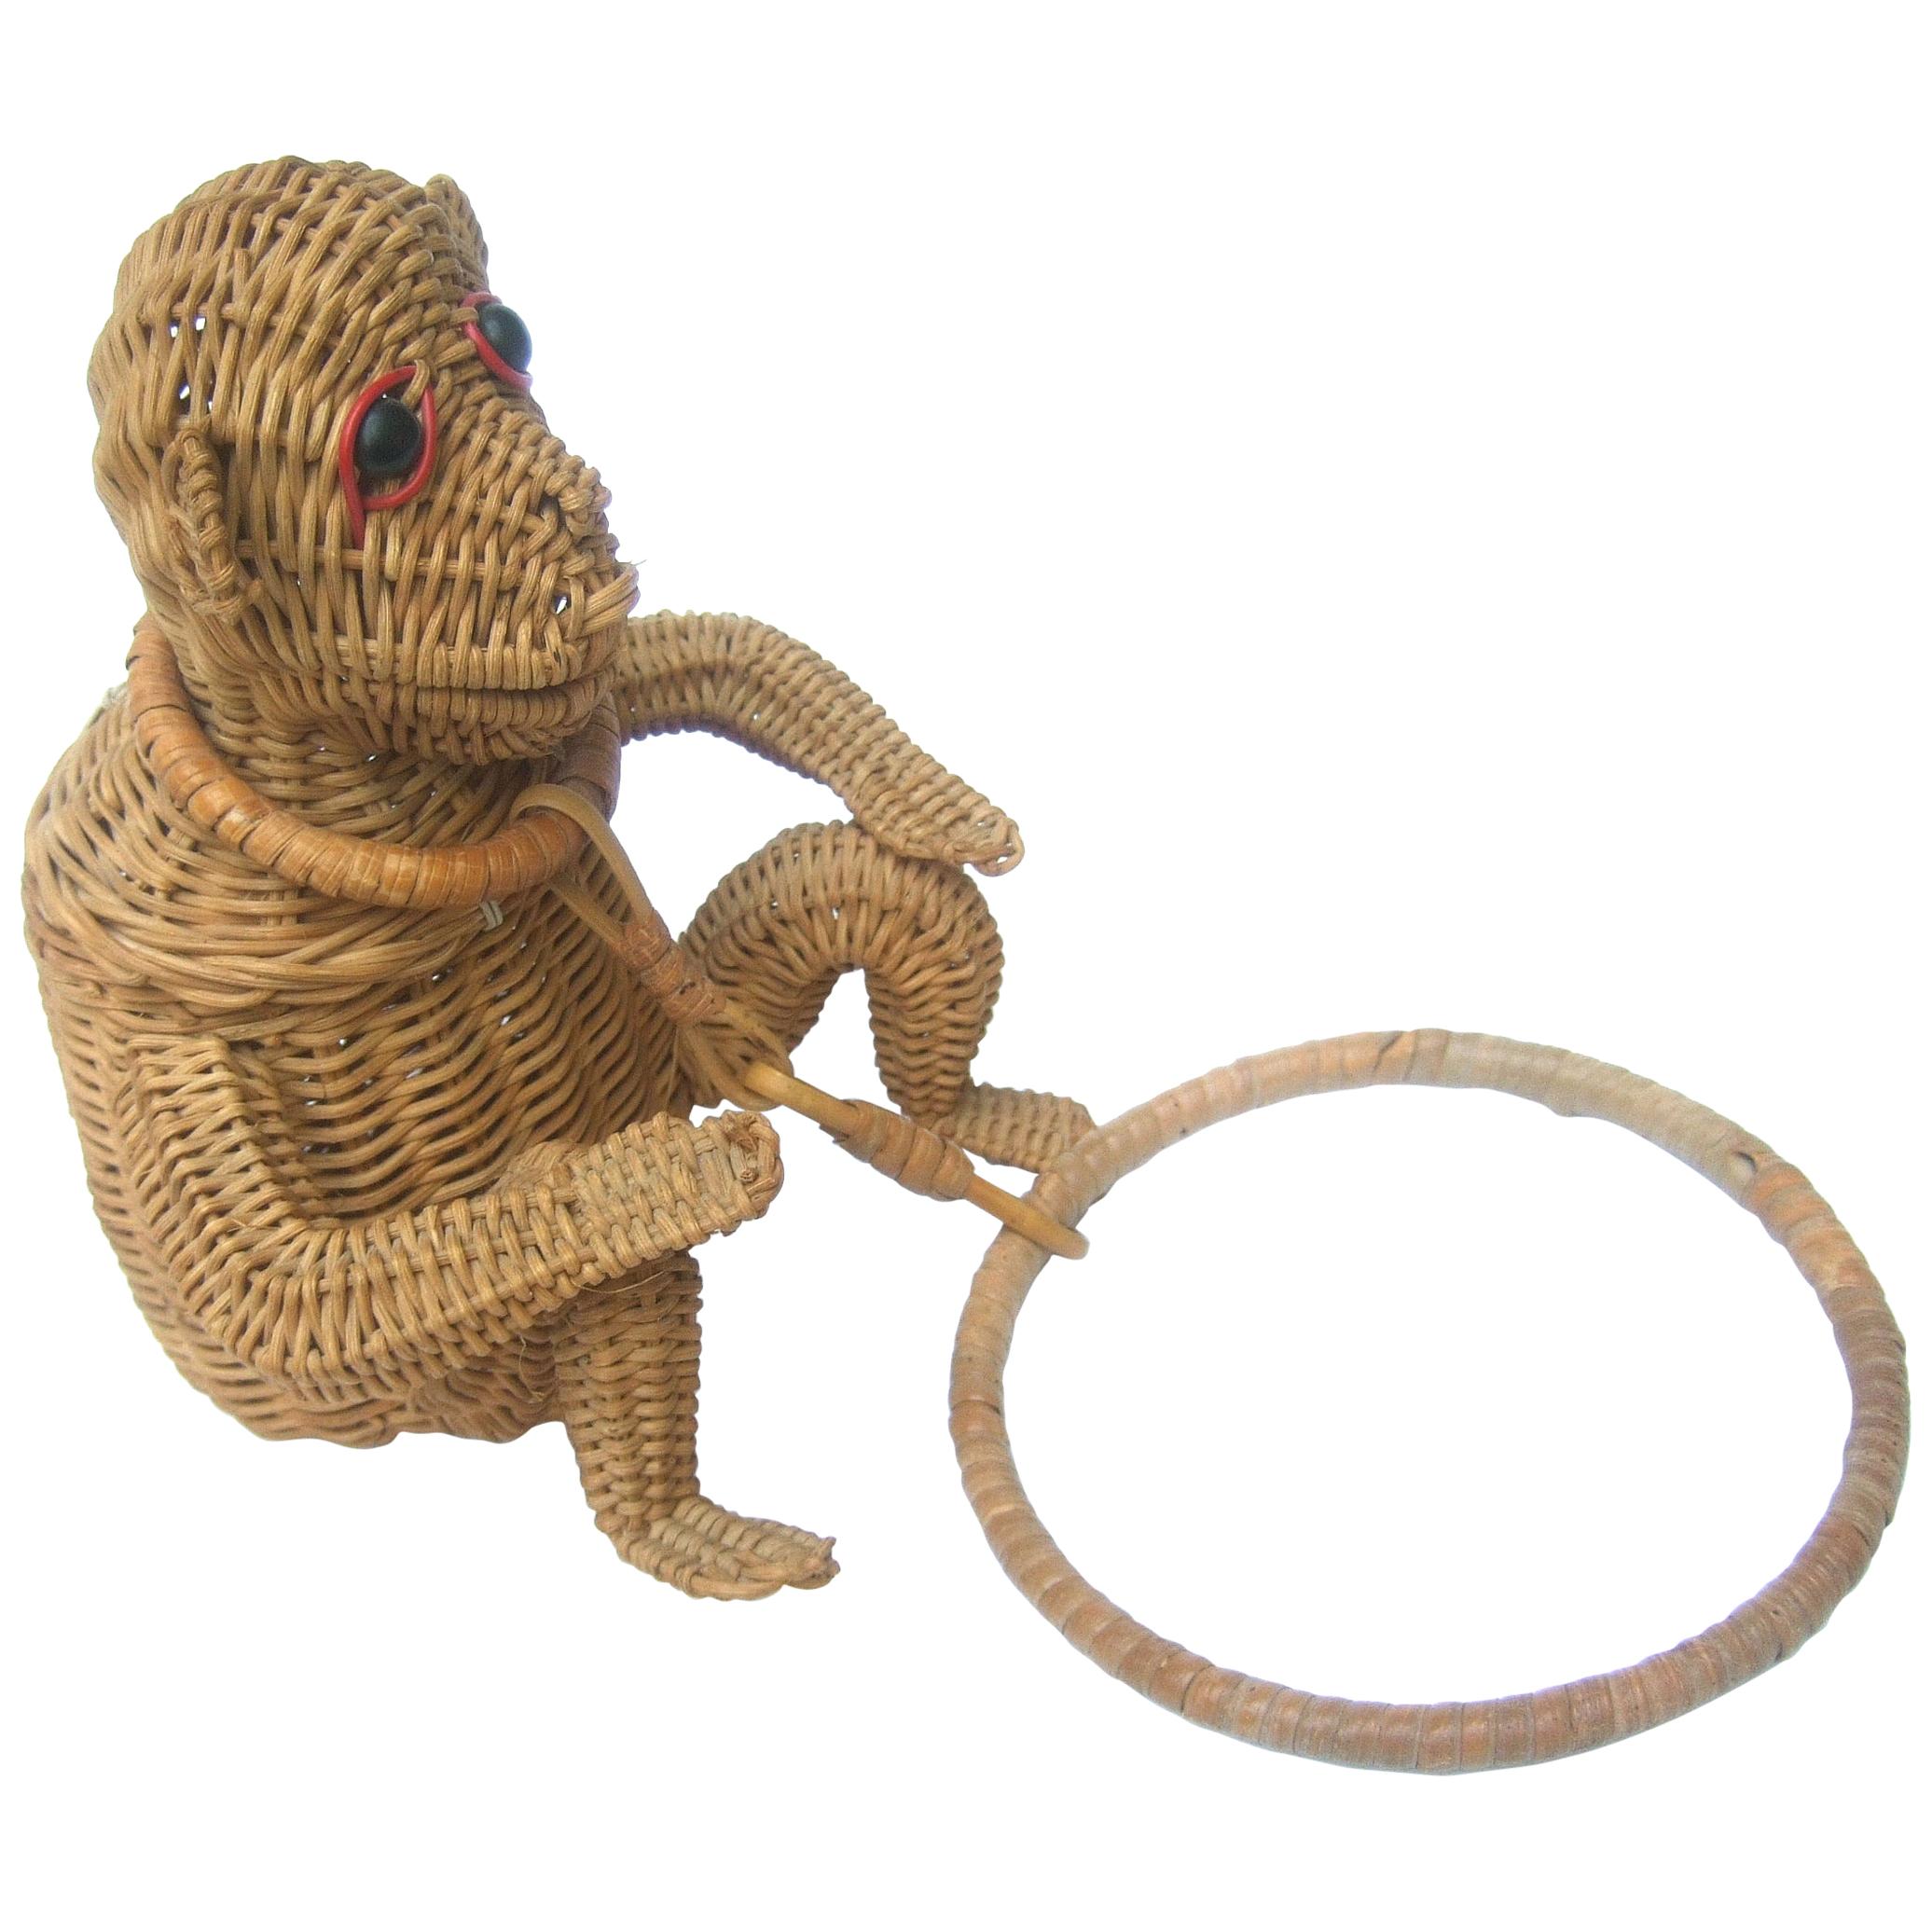 Rare whimsical wicker rattan monkey handbag c 1950s 
The charming diminutive artisan monkey handbag  
is constructed with woven wicker bands

His face is adorned with black resin button eyes
The endearing monkey is suspended from a circular 
round